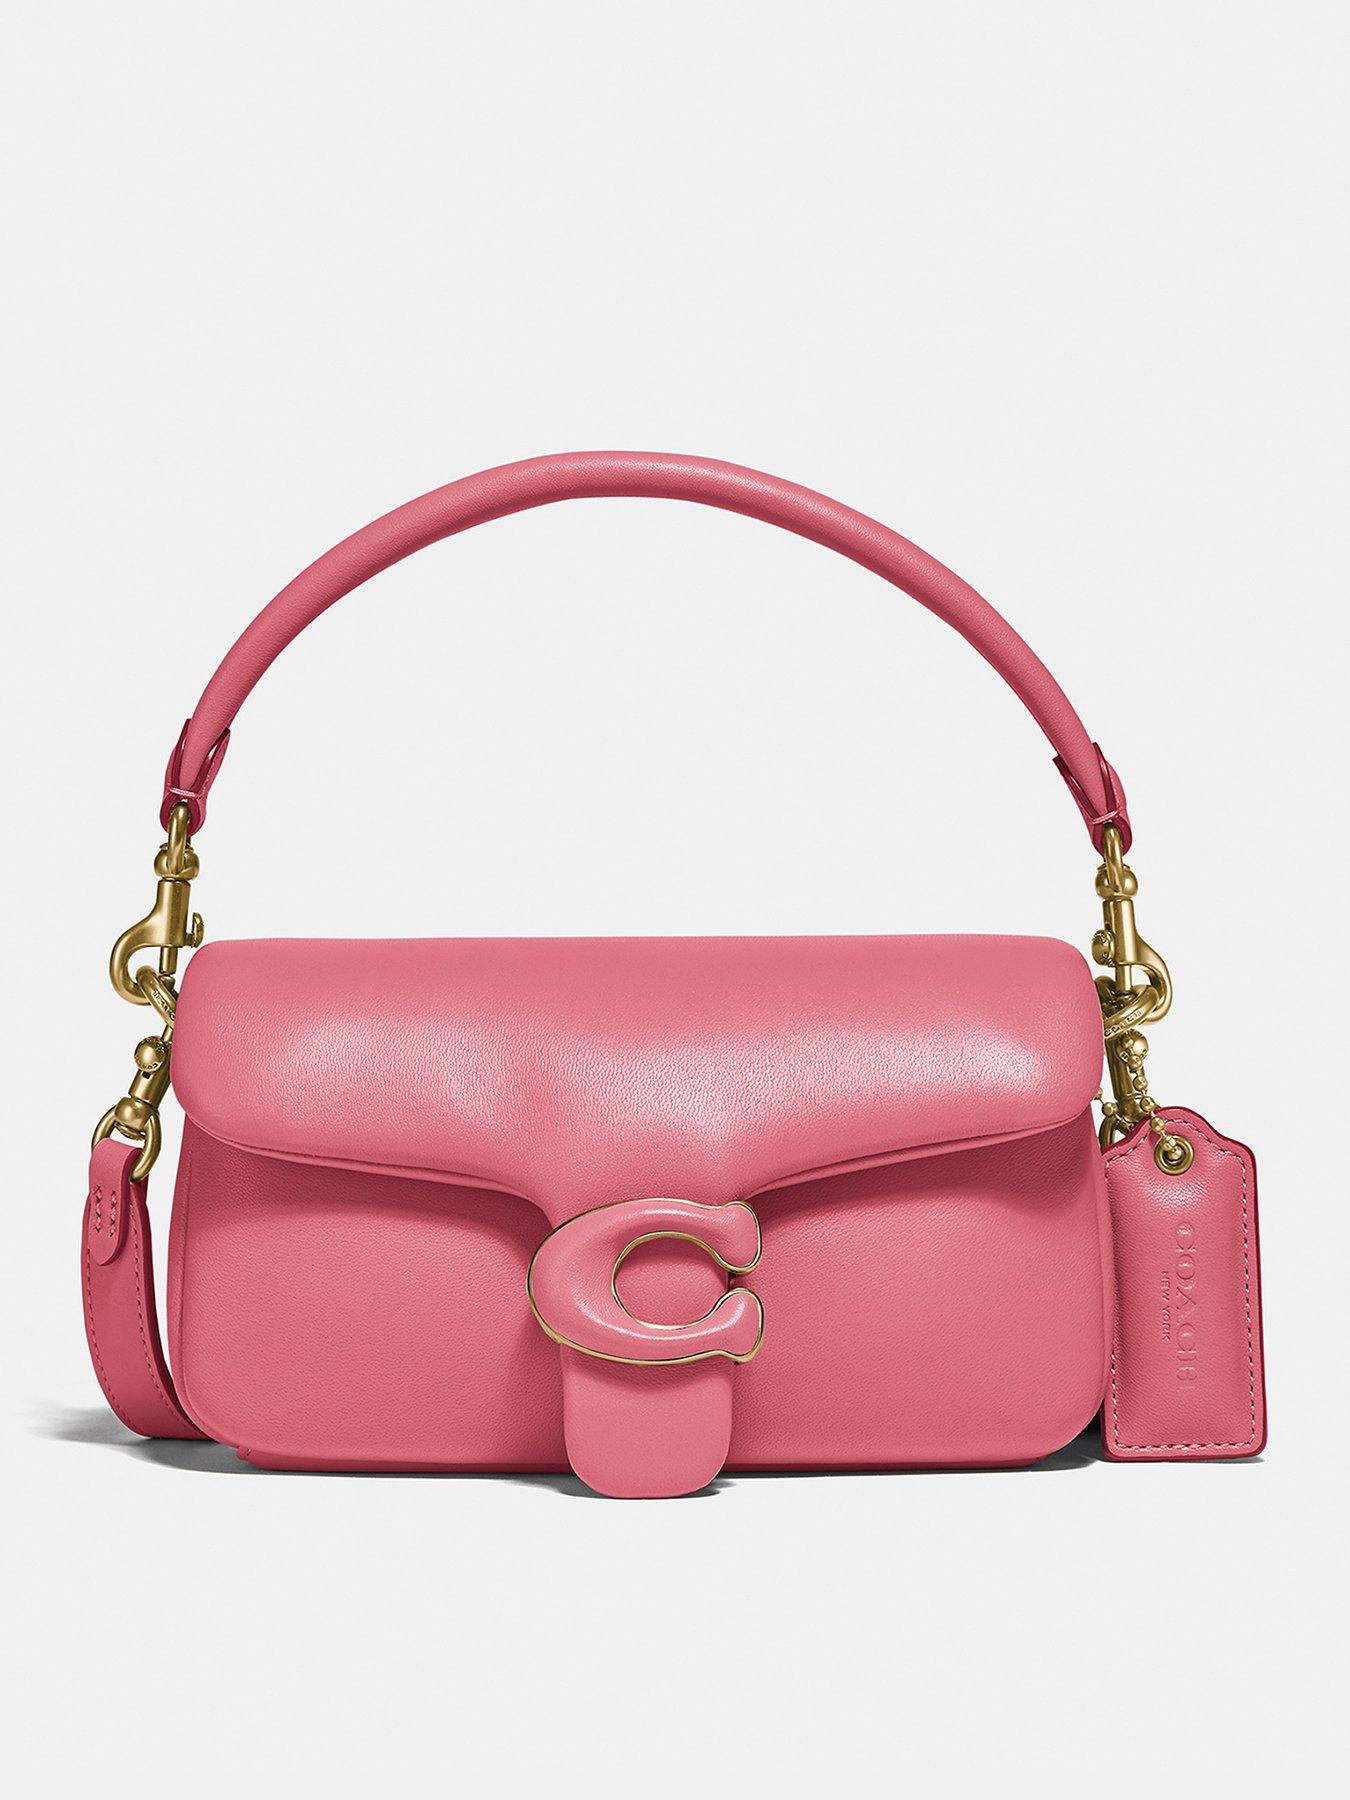 COACH Pillow Tabby 18 Leather Shoulder Bag - Pink | very.co.uk